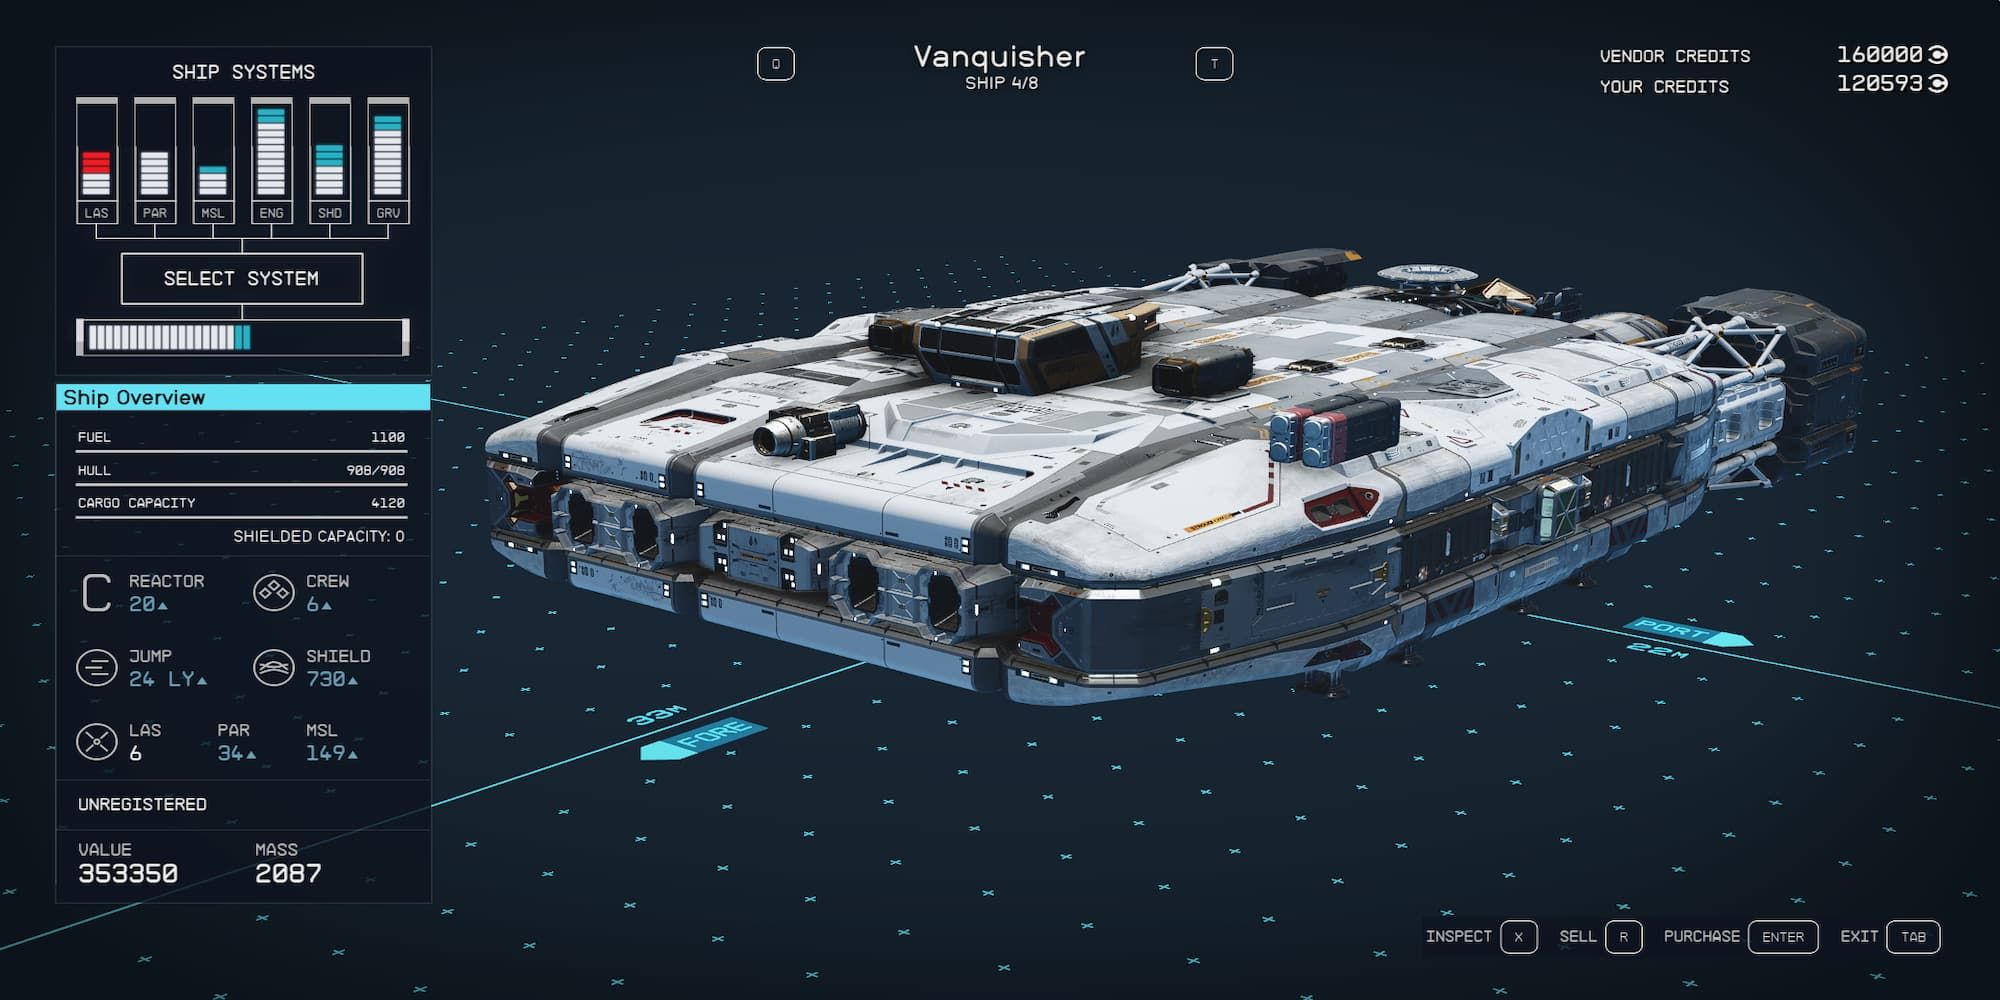 The Vanquisher Ship In The Menu 